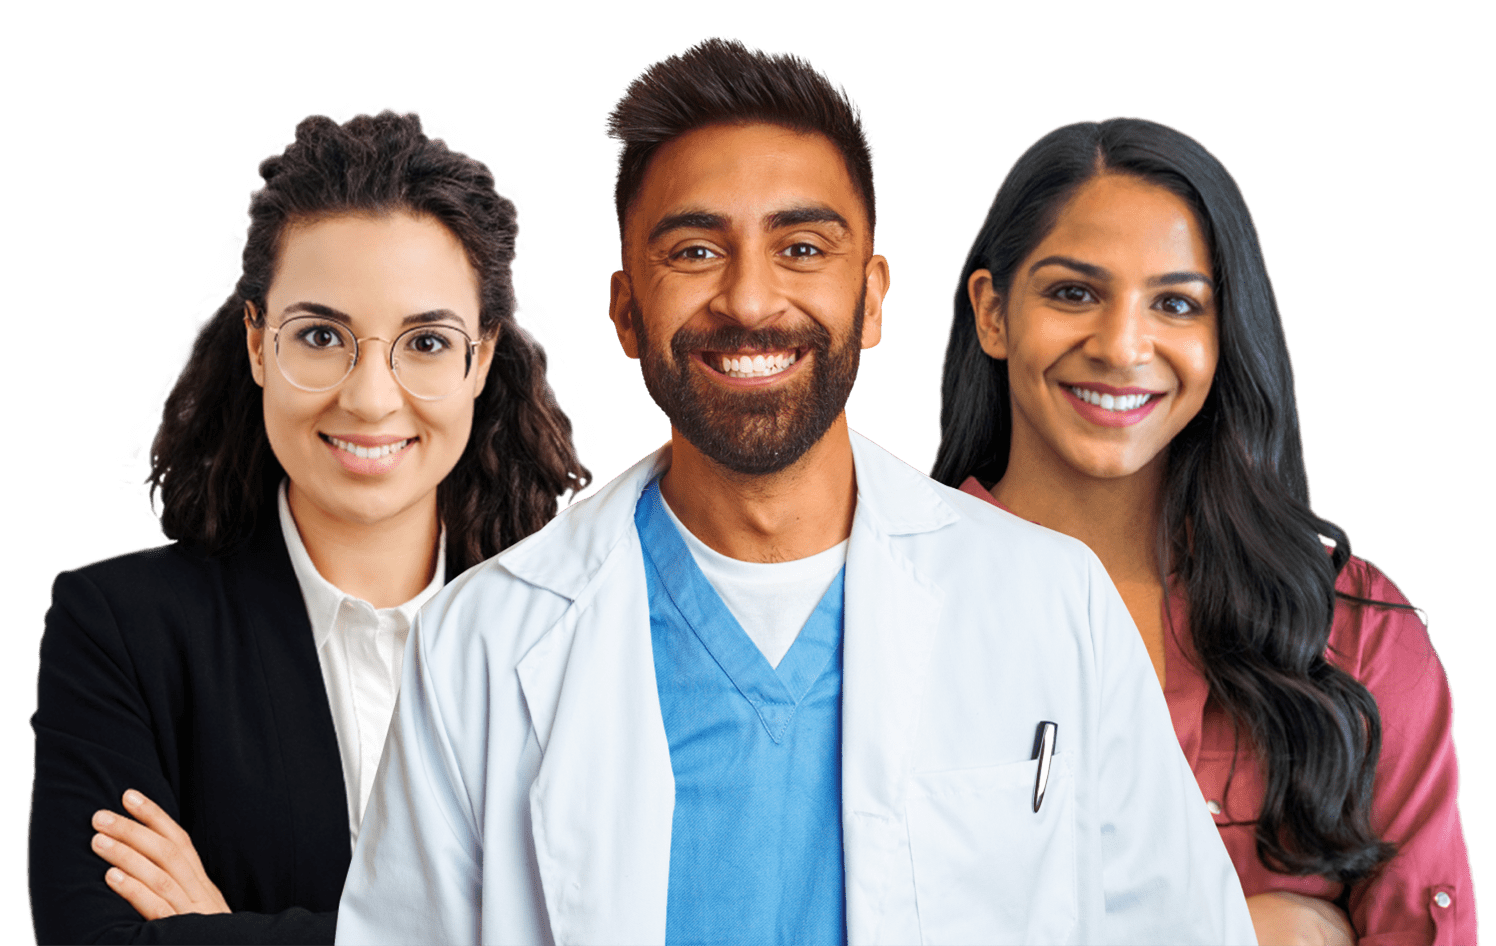 A team of three smiling dentists